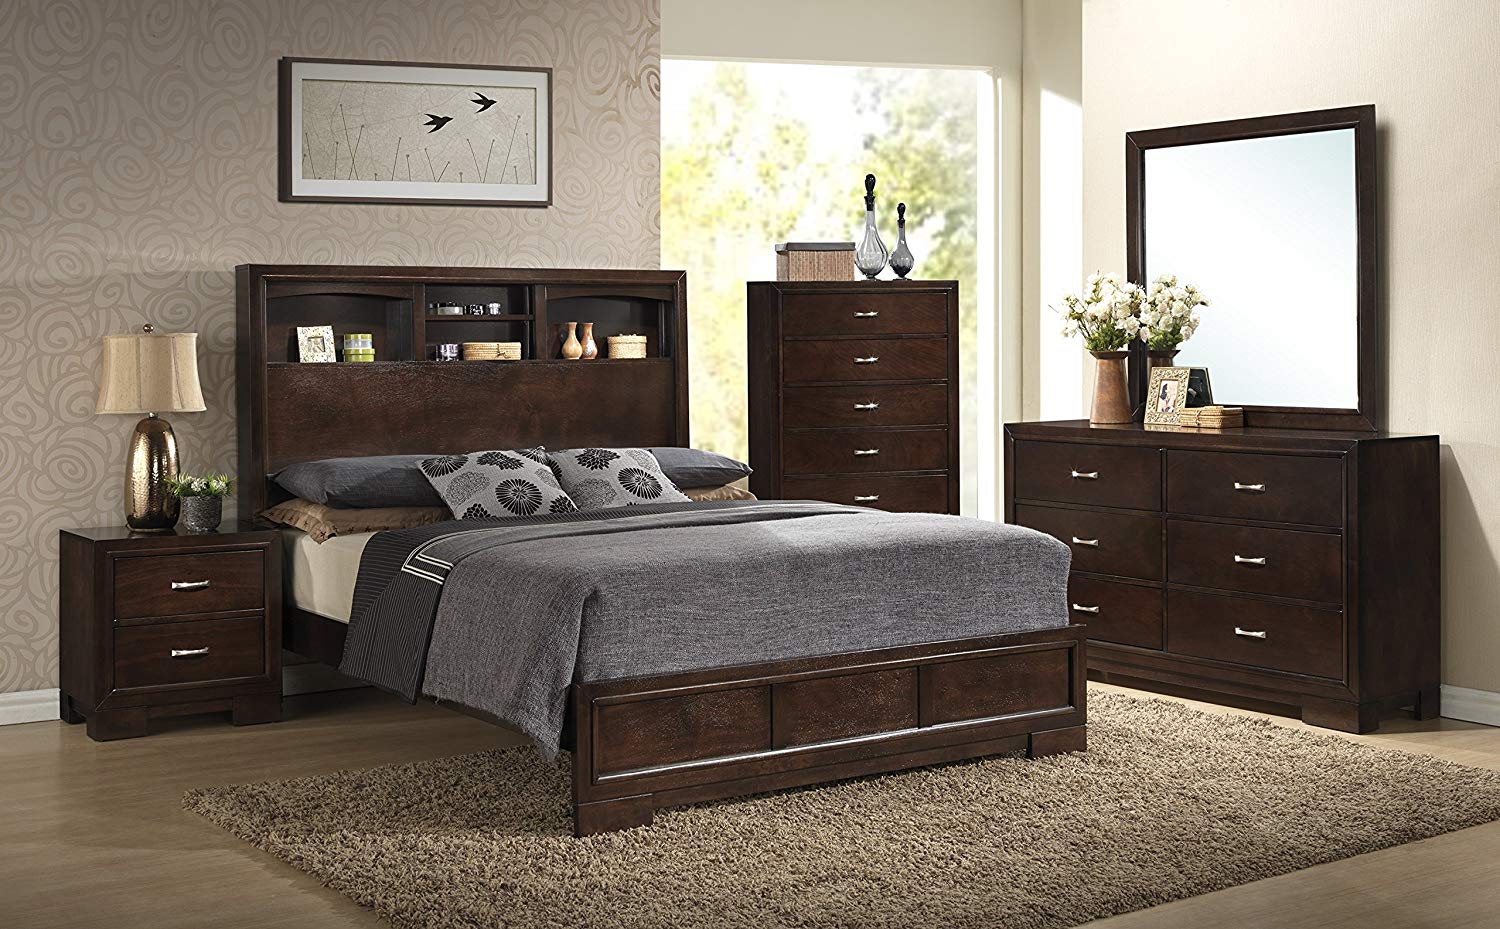 Queen Size 5 Piece Bedroom Set by Roundhill Furniture